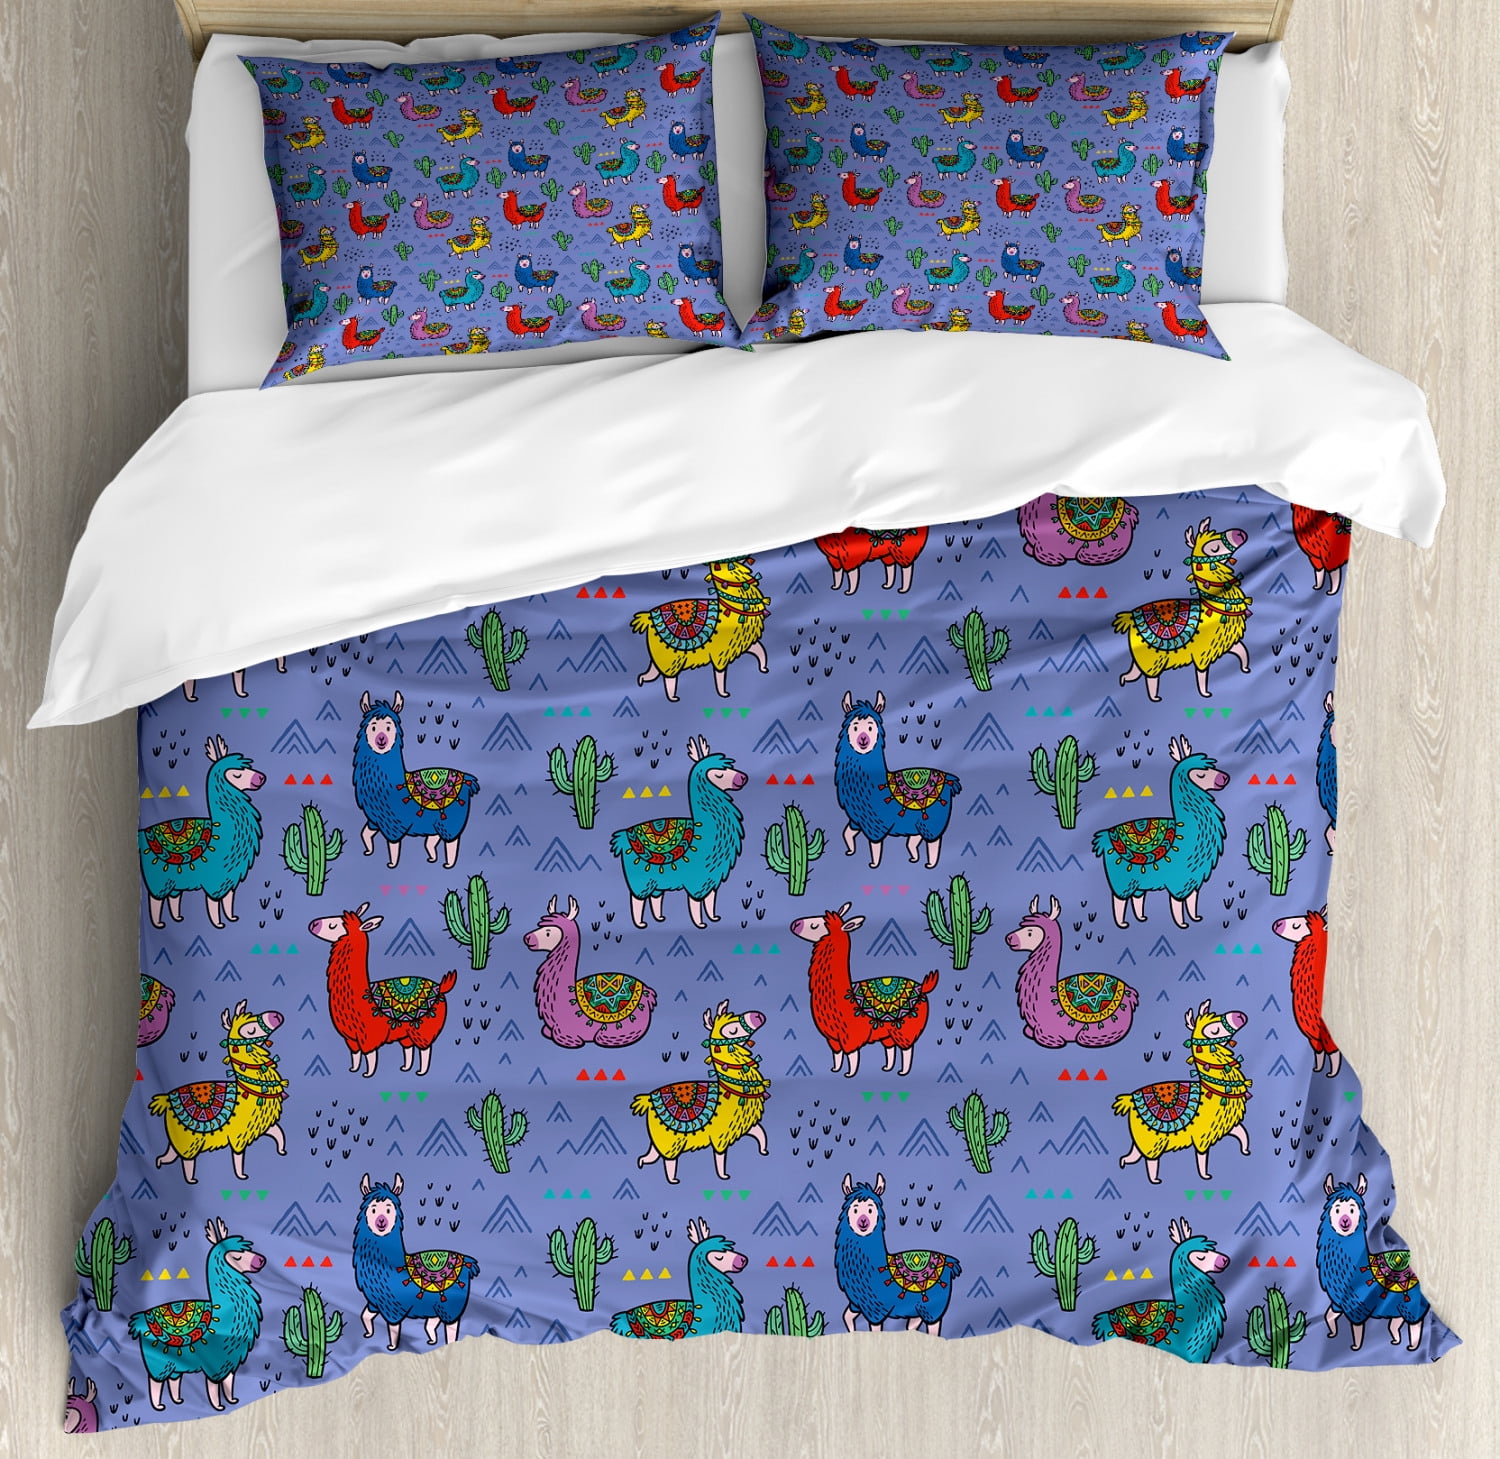 SALE LLAMA Duvet Cover with Pillowcase Quilt Cover Bedding Set ALL SIZES 